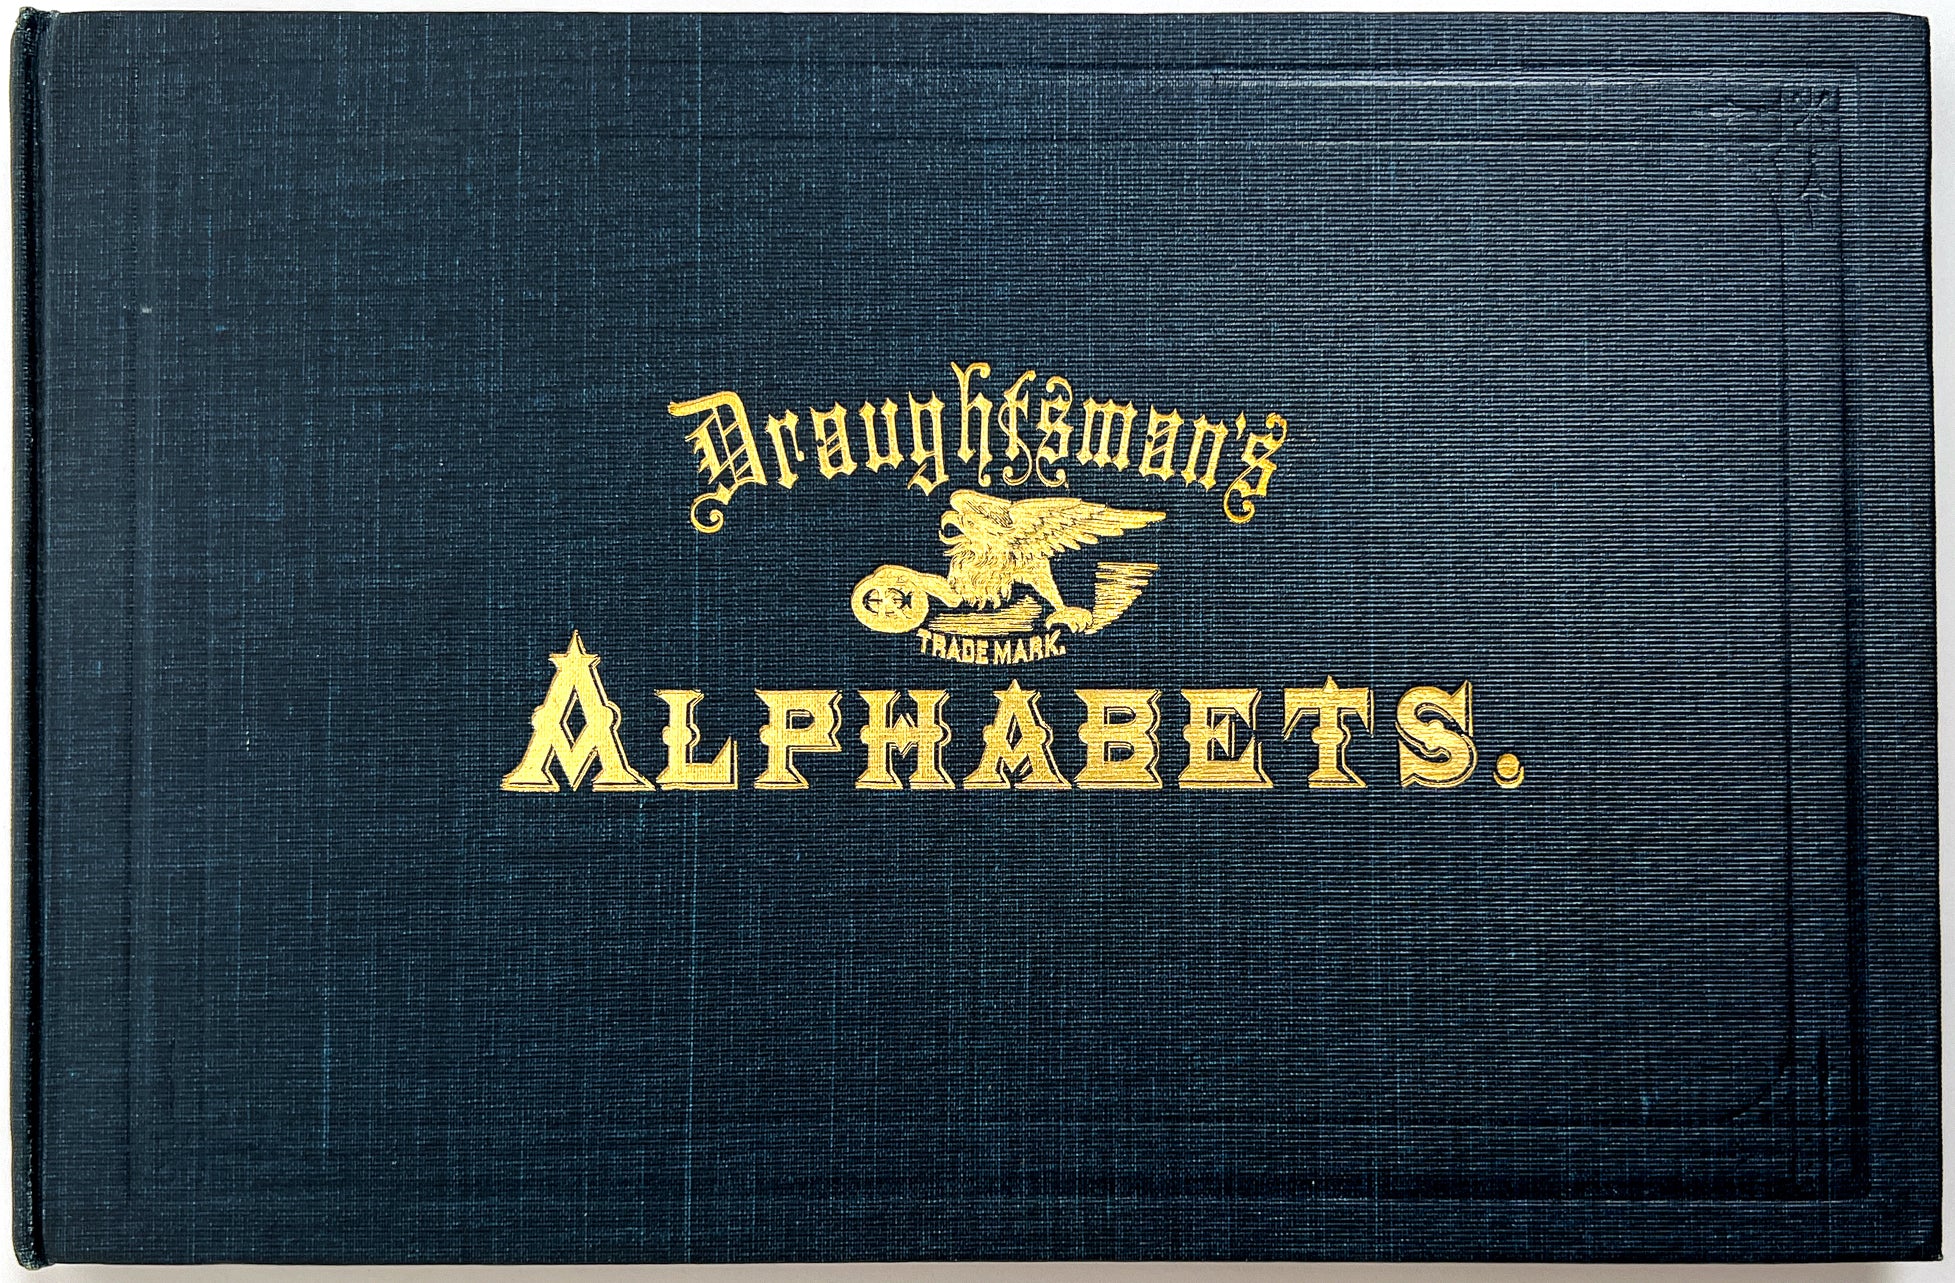 Draughtsman's Alphabets: A Series of Plain and Ornamental Alphabets Designed especially for Engineers, Architects, Draughtsmen, Engravers, Painters etc.